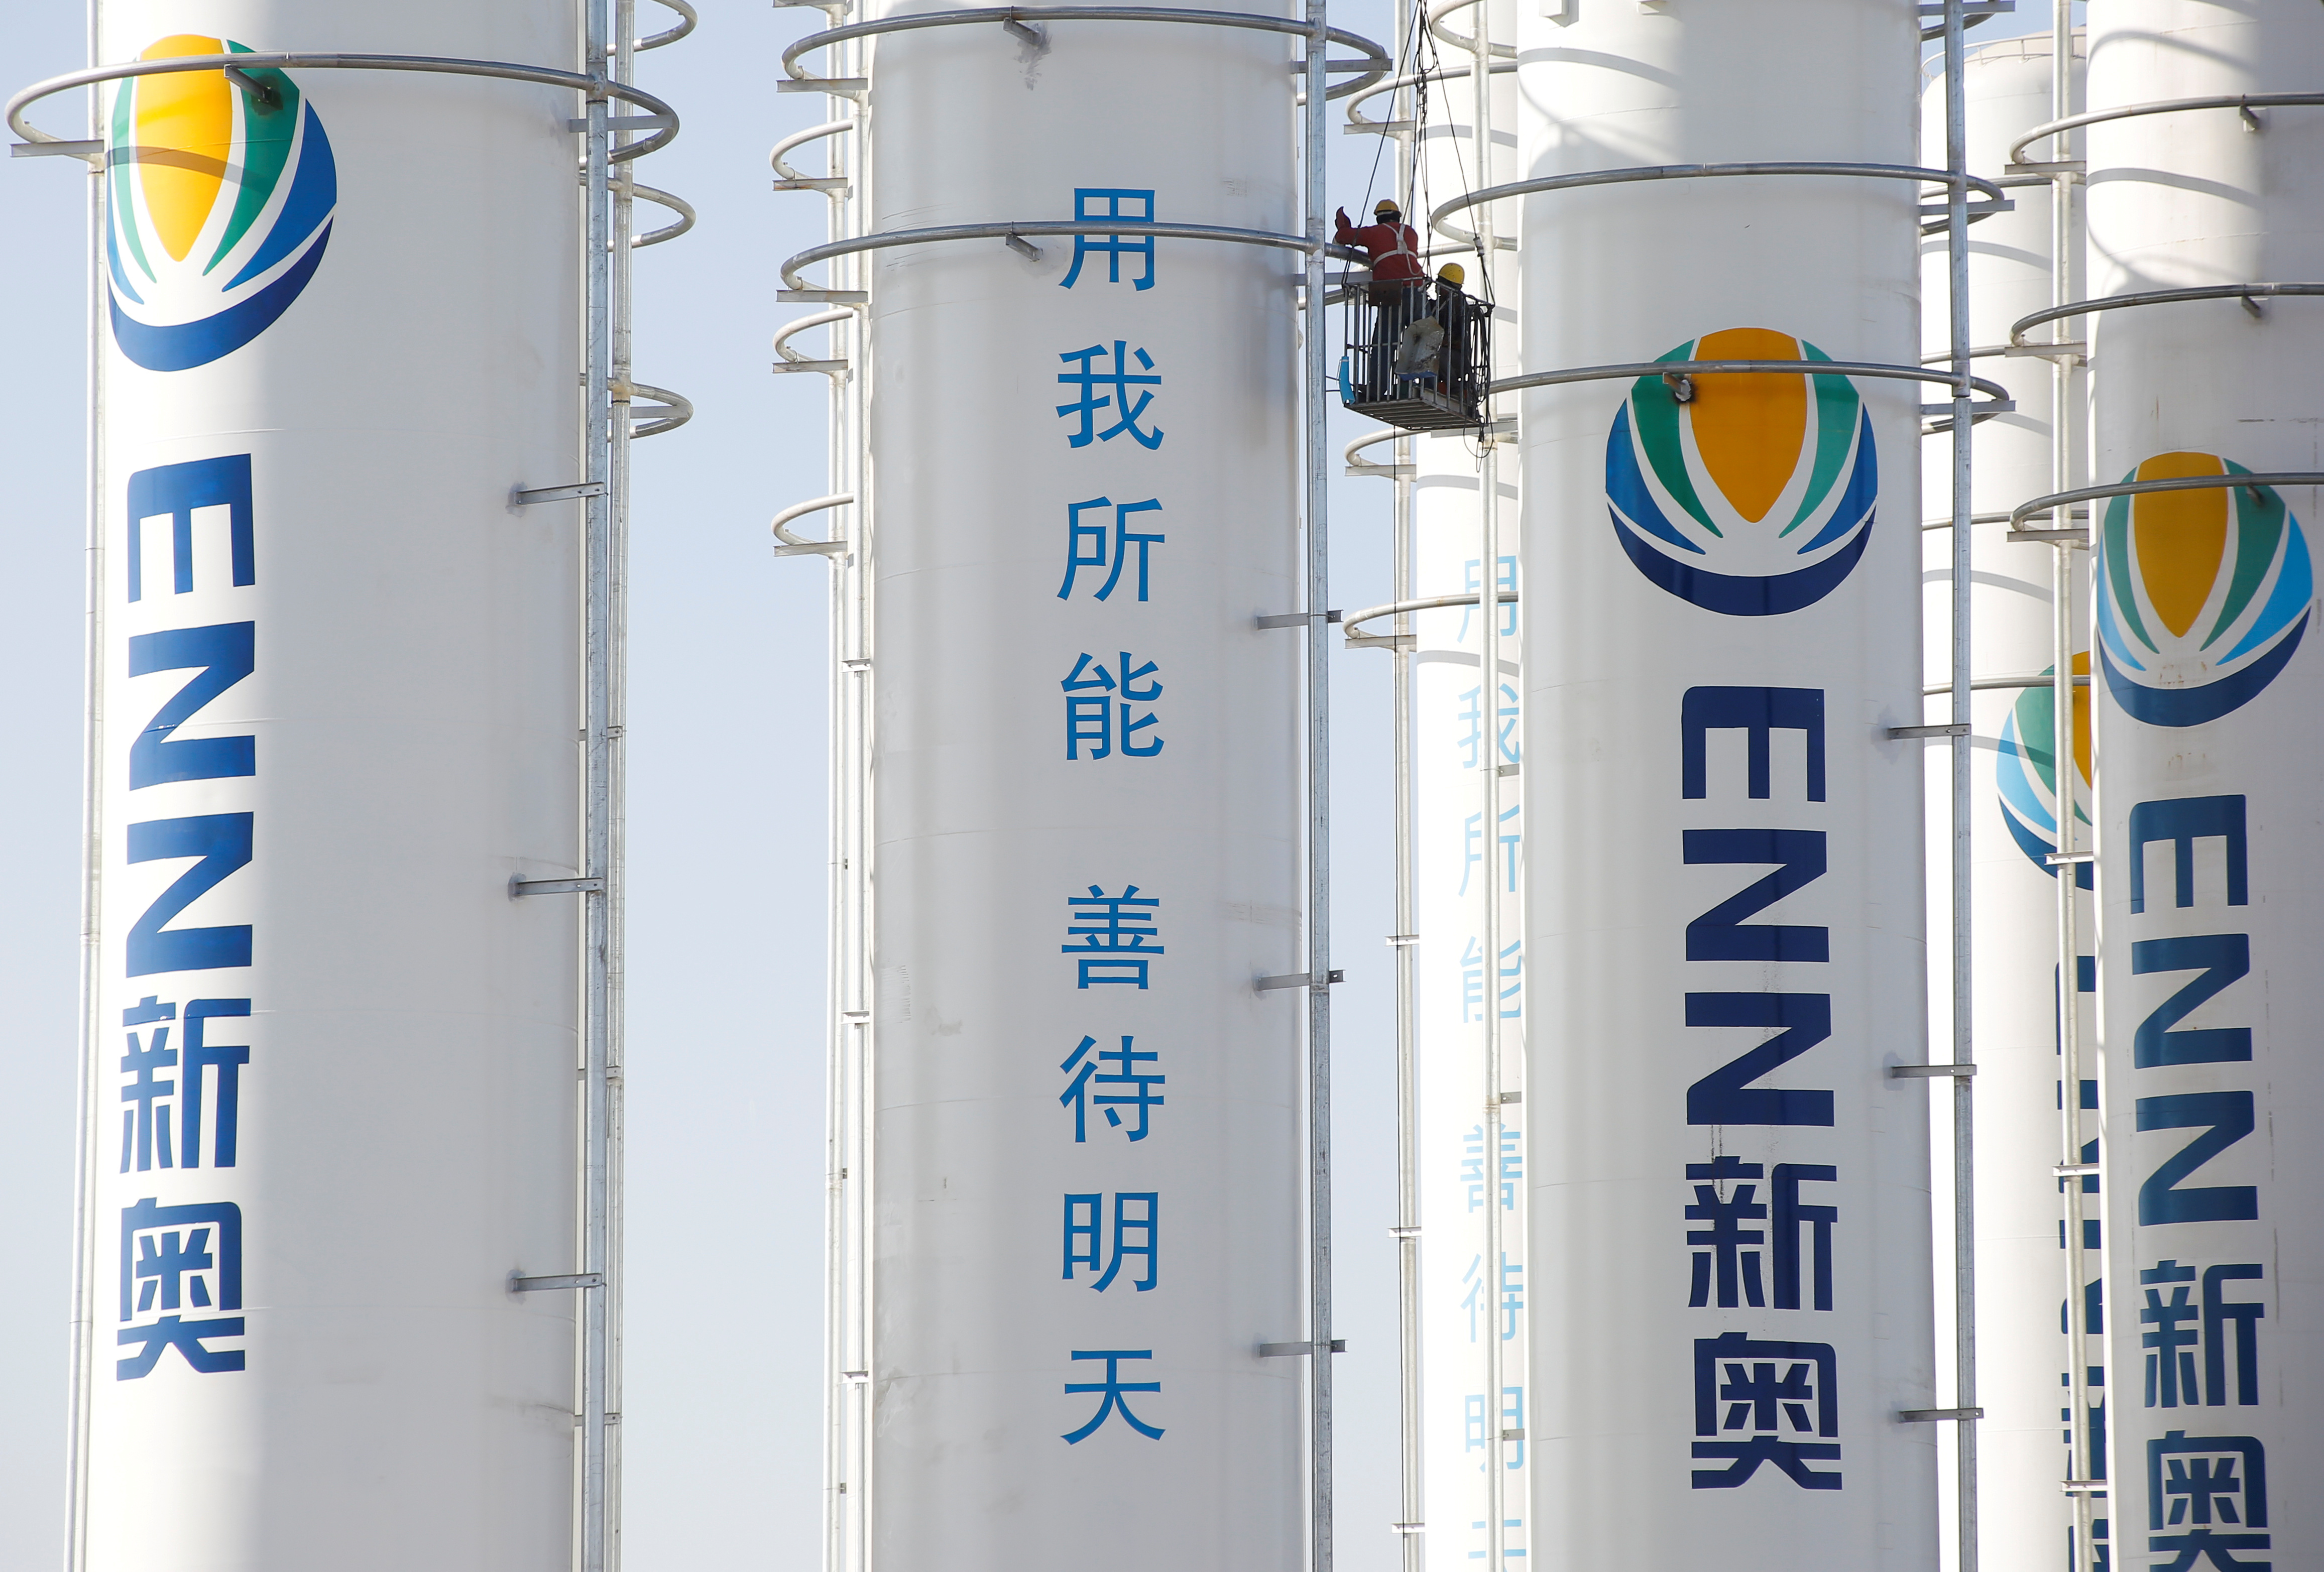 A liquified natural gas (LNG) storage facility of the ENN Group Co is under construction in Baoding